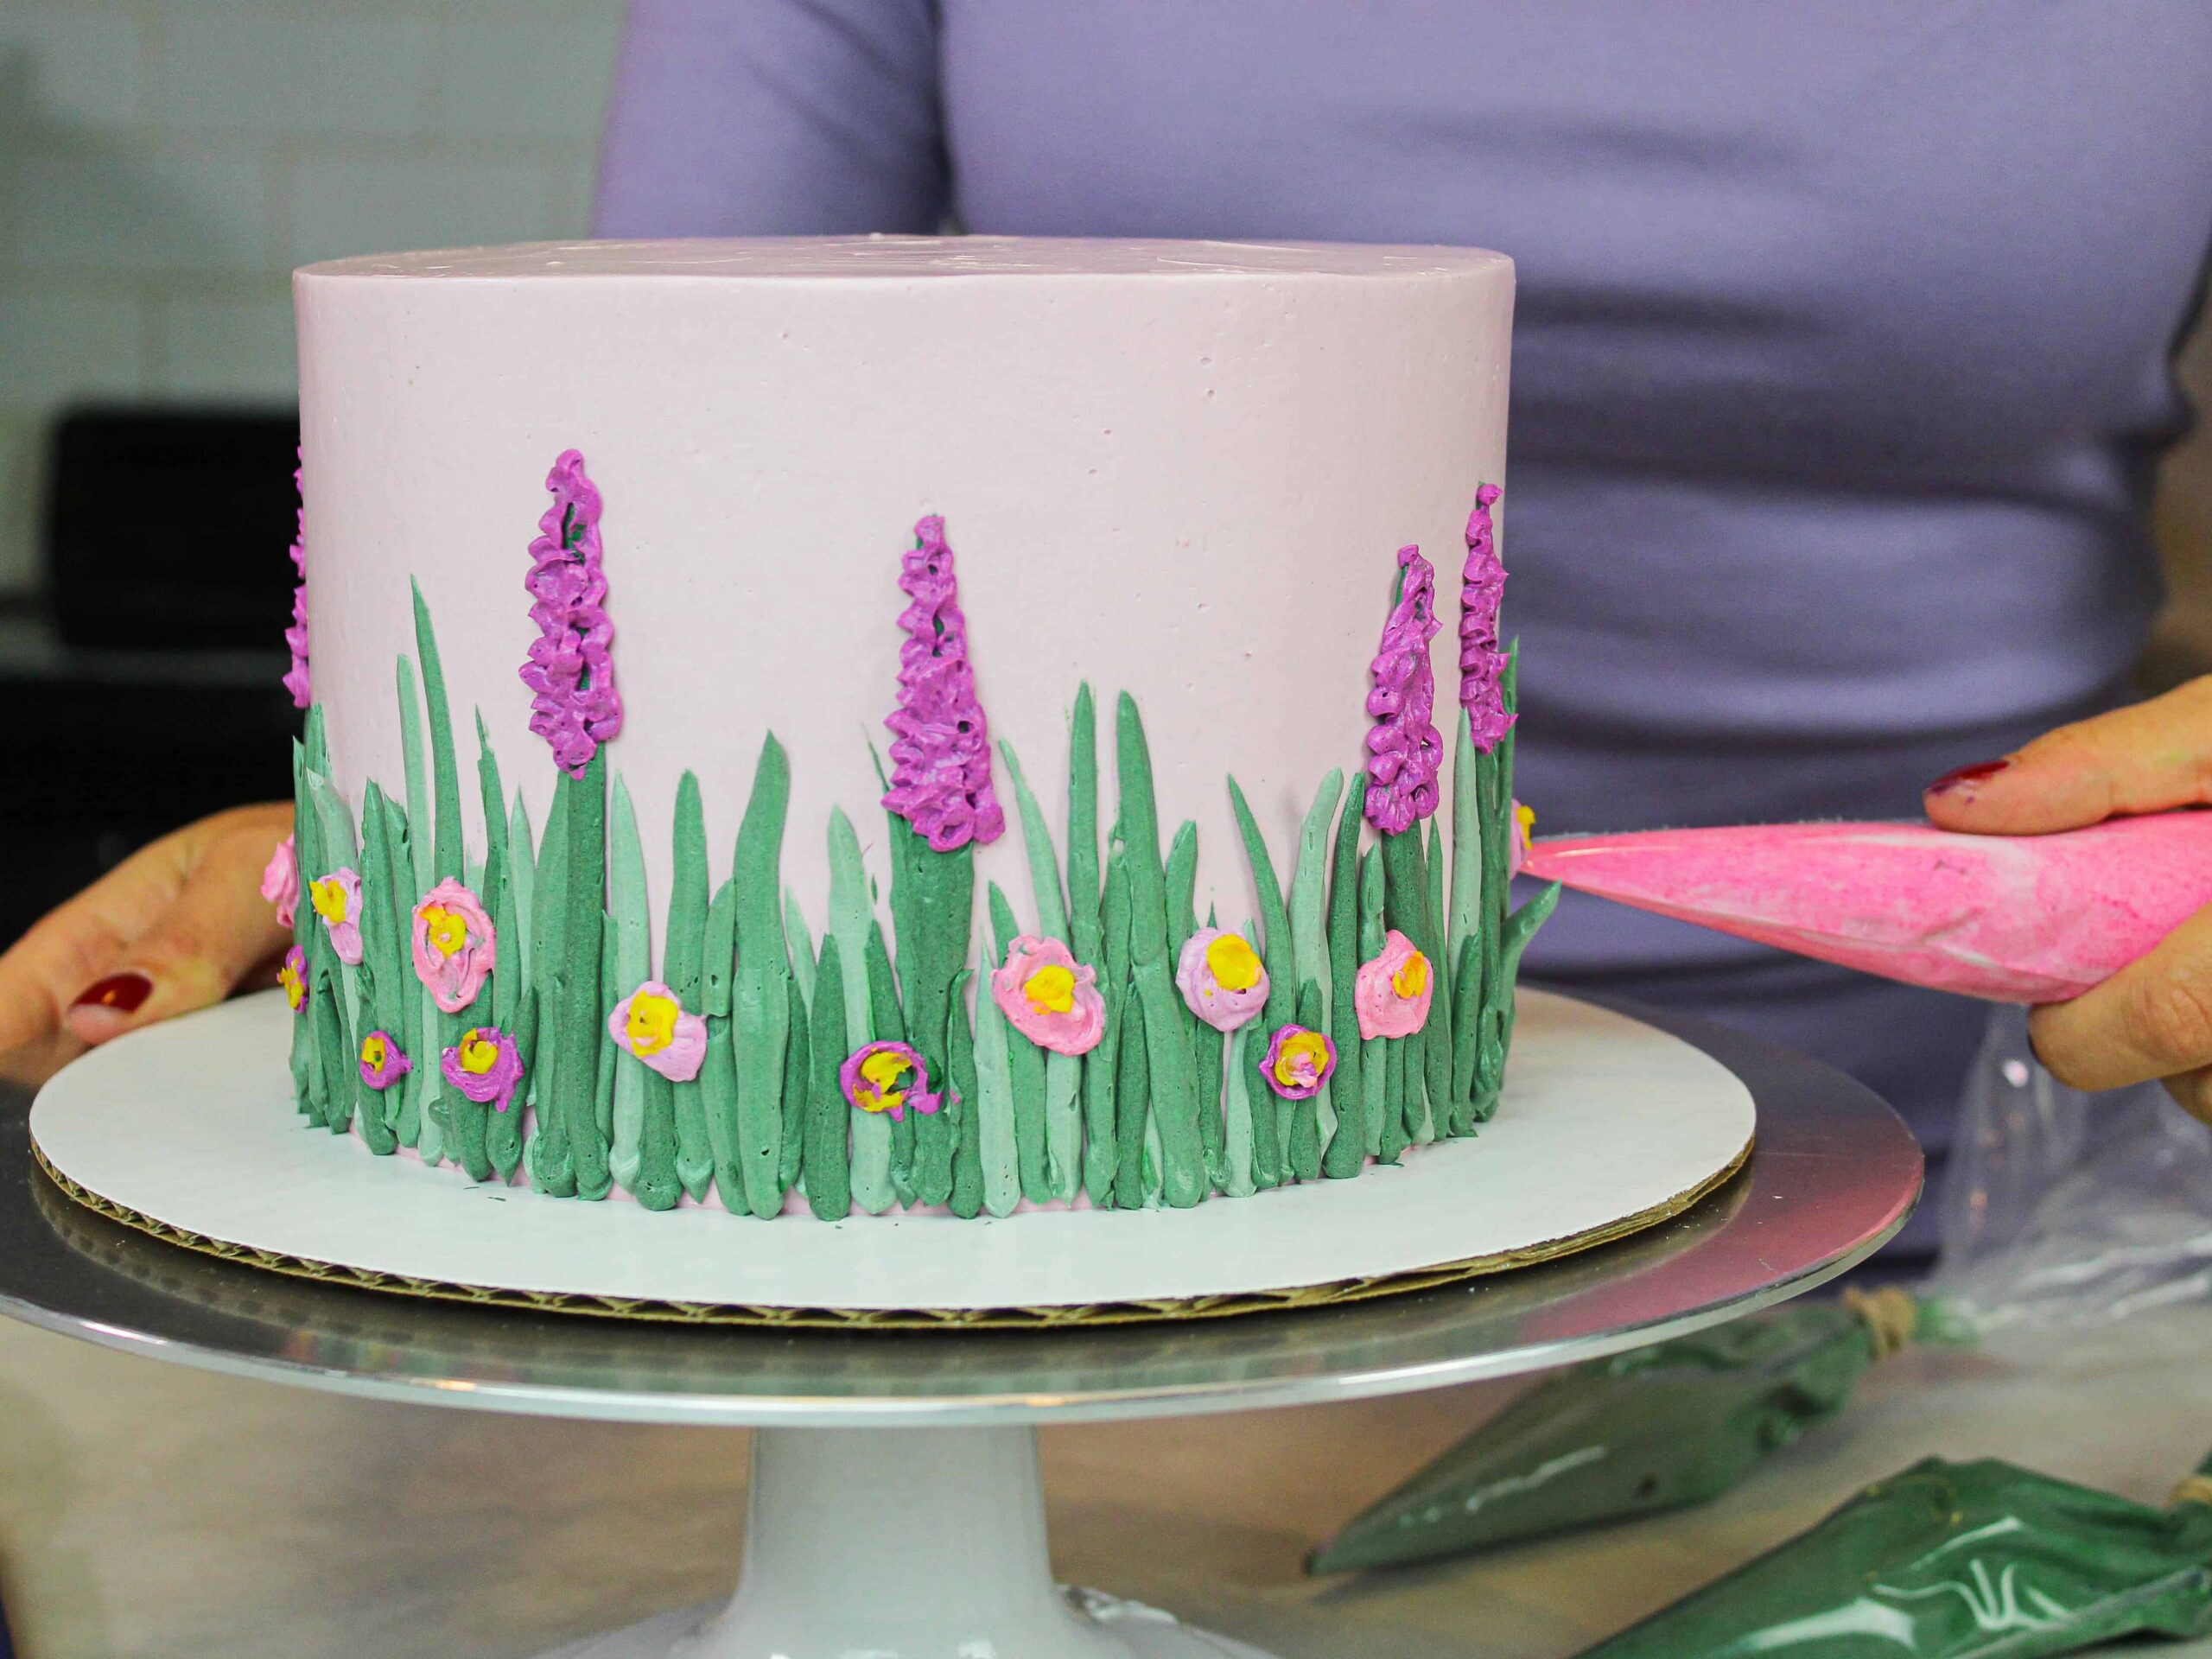 image of spring easter cake being decorated with swiss meringue buttercream flowers